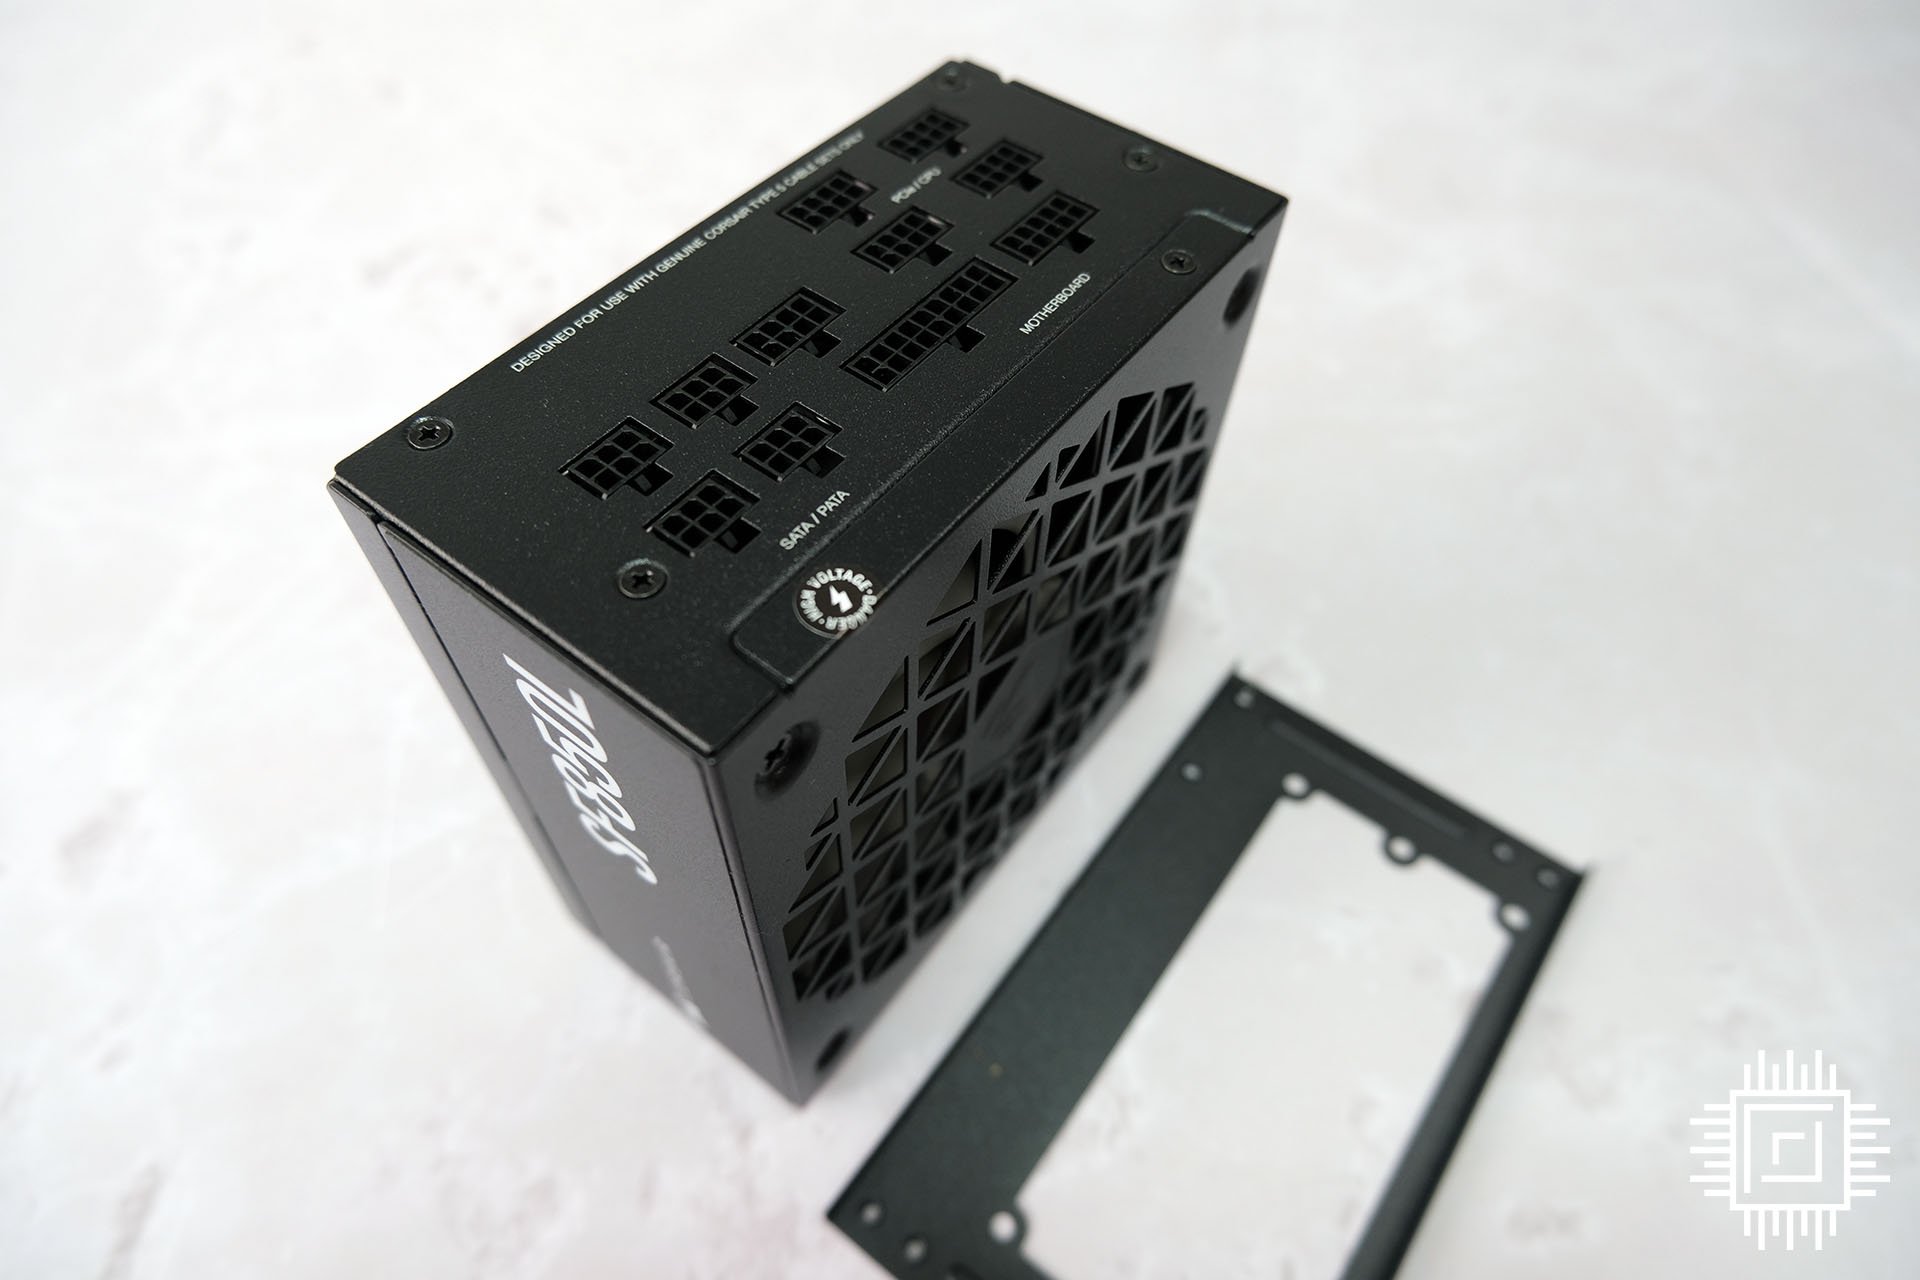 The Corsair SF850L with ATX bracket on display.